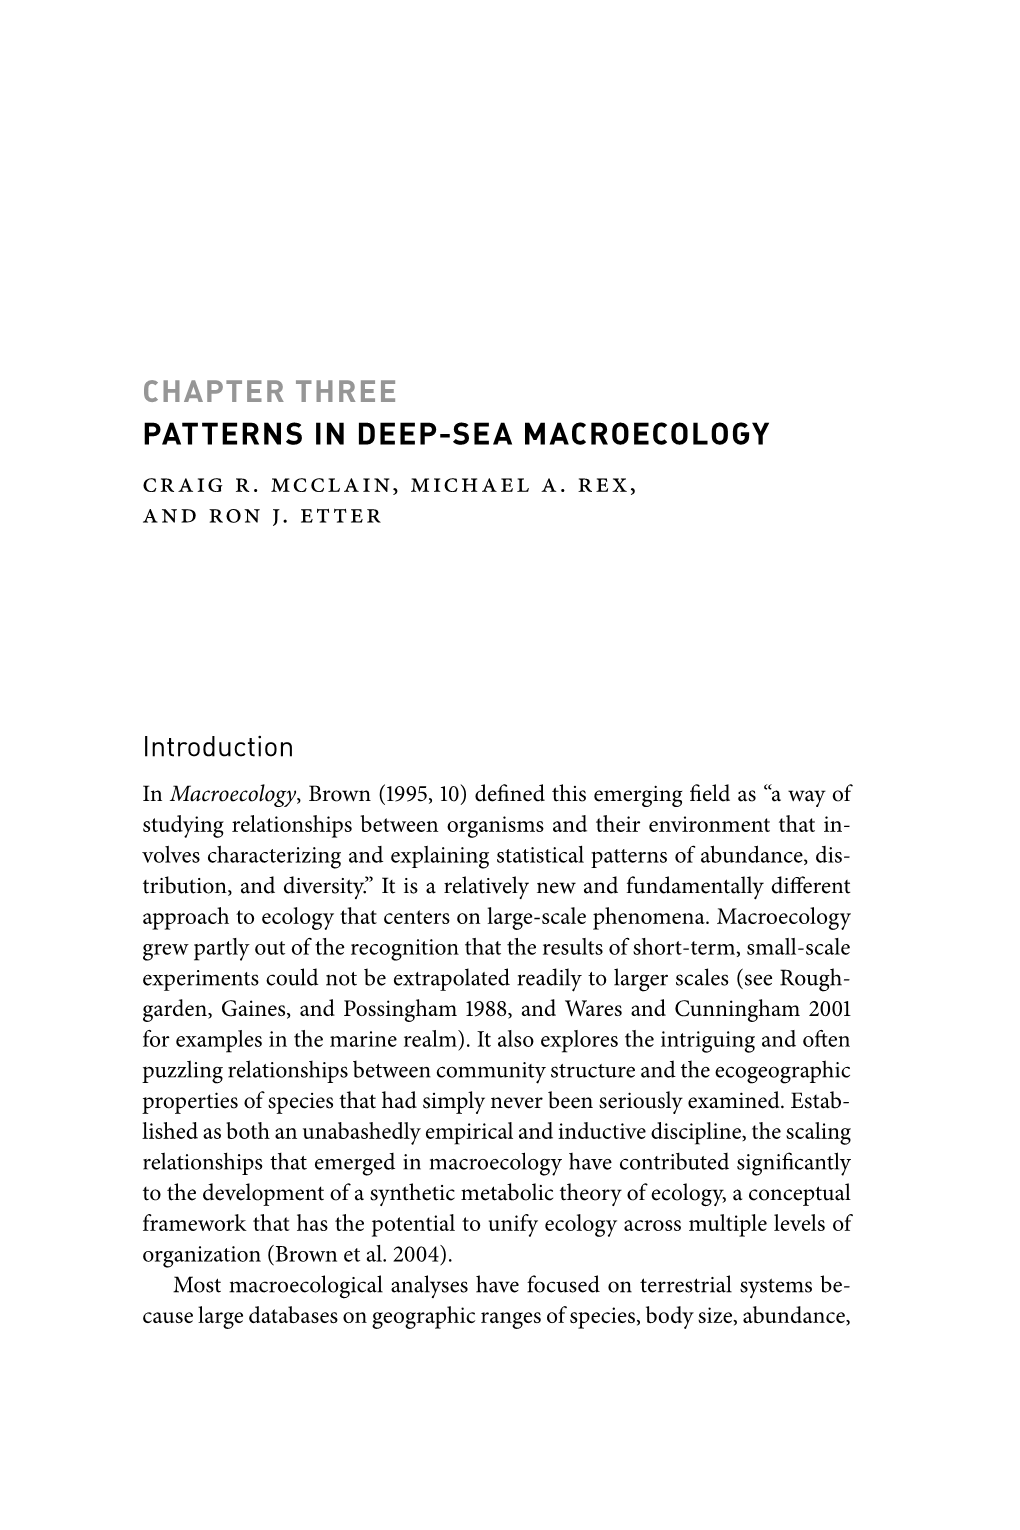 Marine Macroecology, a Shortcoming That This Volume Is Intended to Remedy